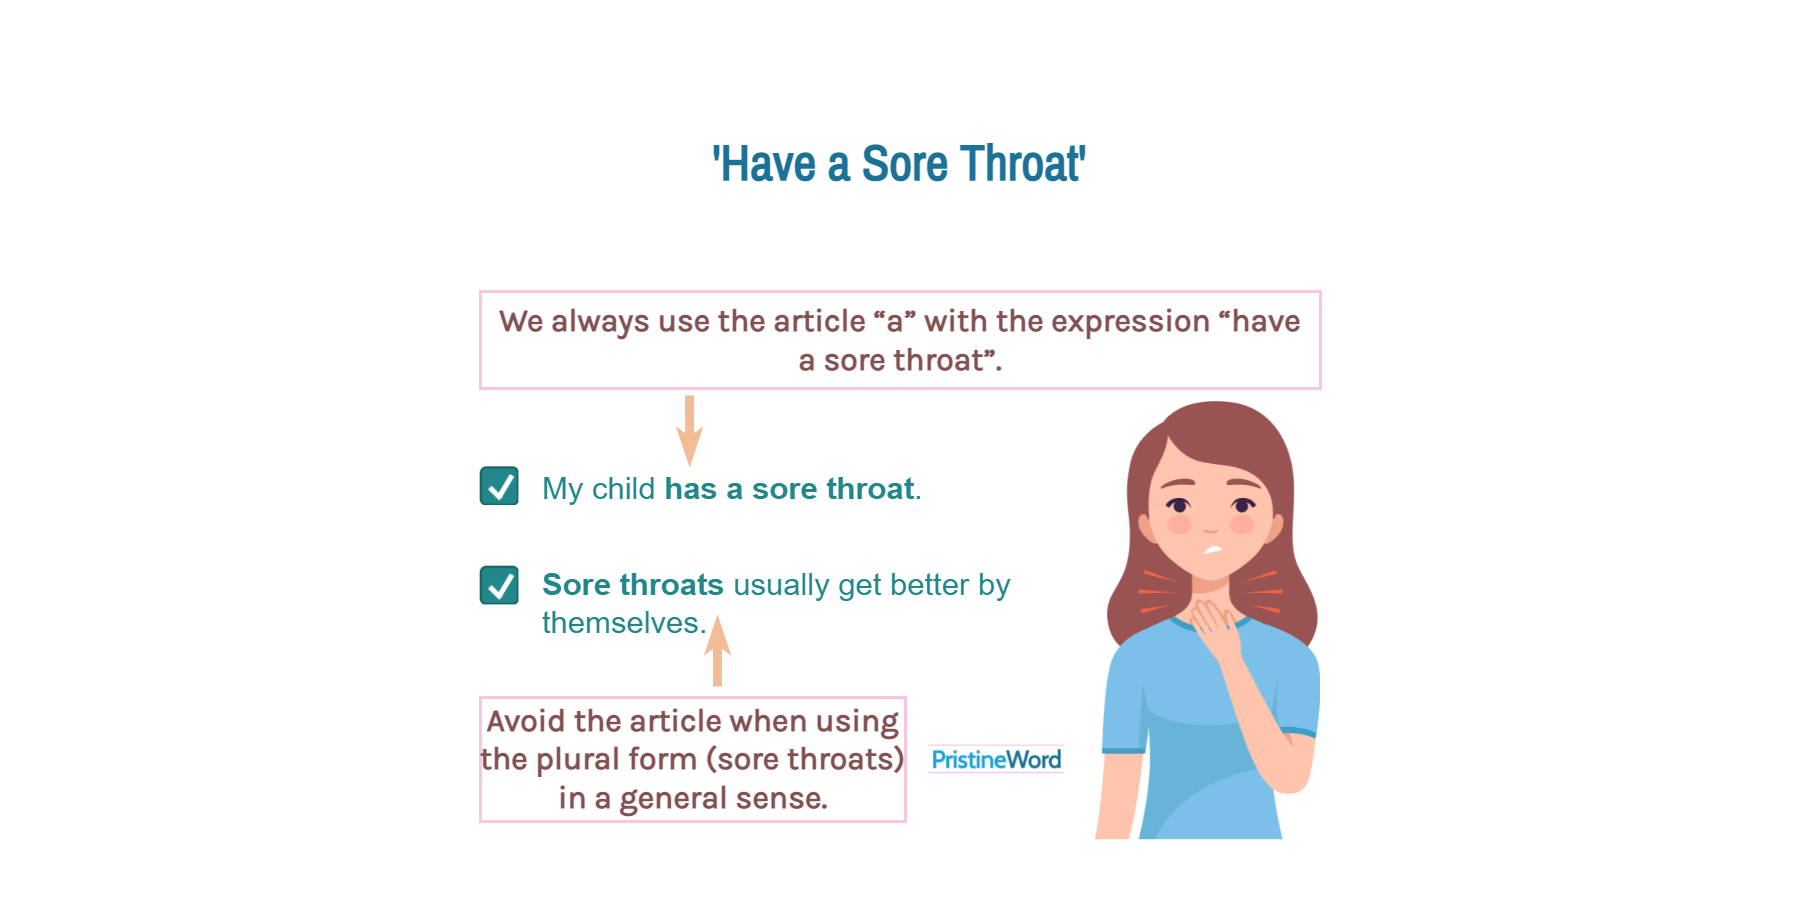 Should You Use the Article 'a' Before 'Sore throat'?